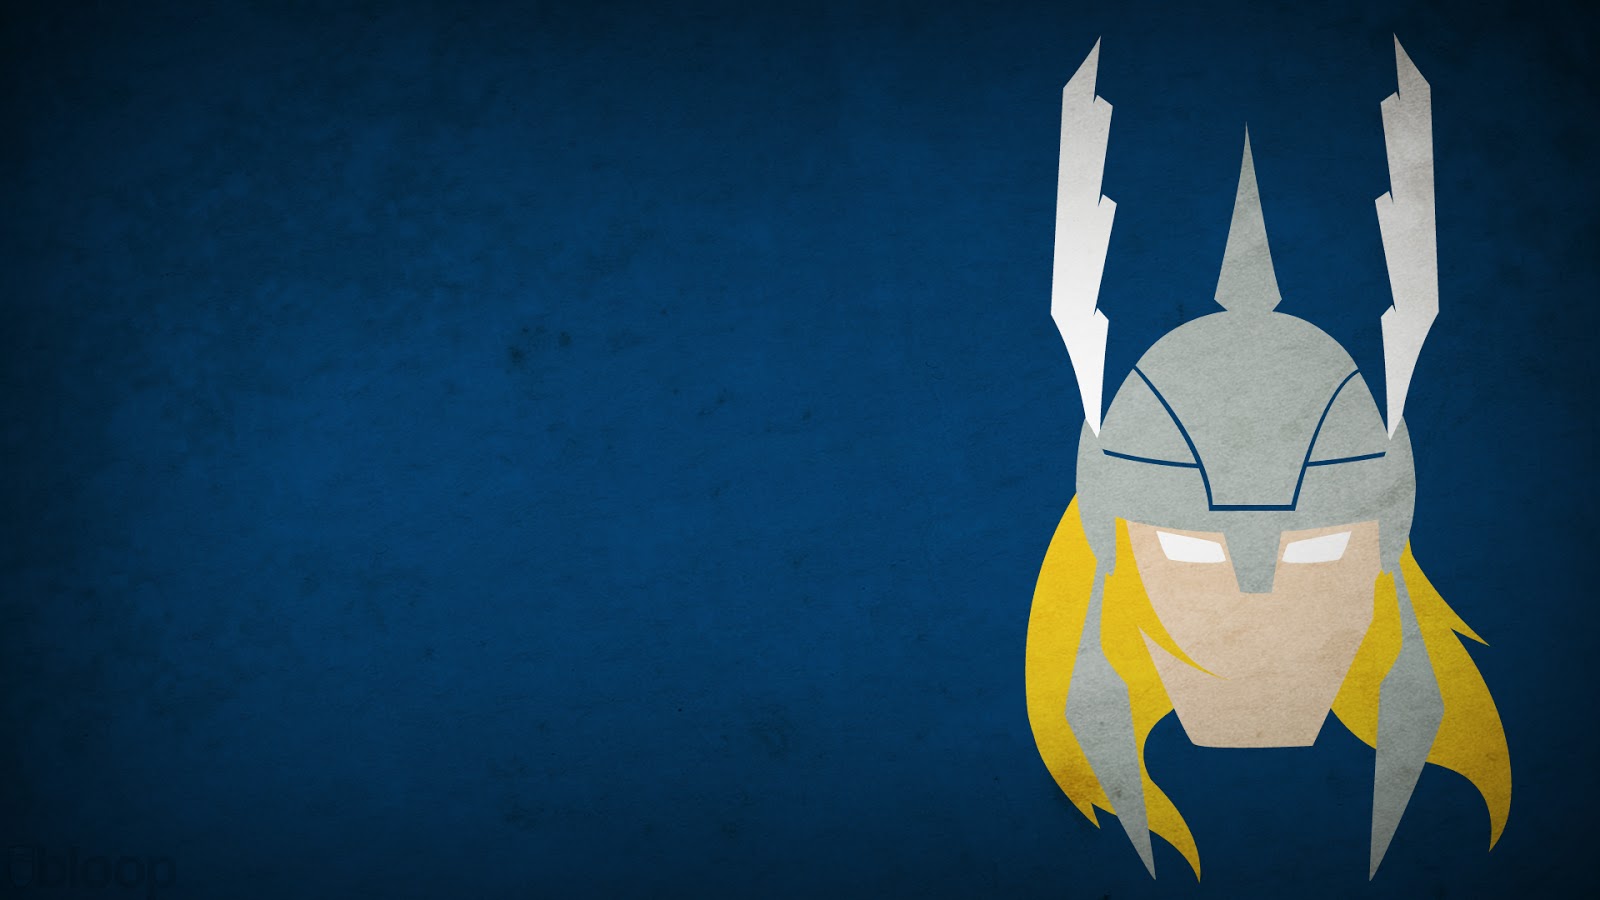 Wallpaper Minimalist Heroes Pack HD 1080p Central Photoshop